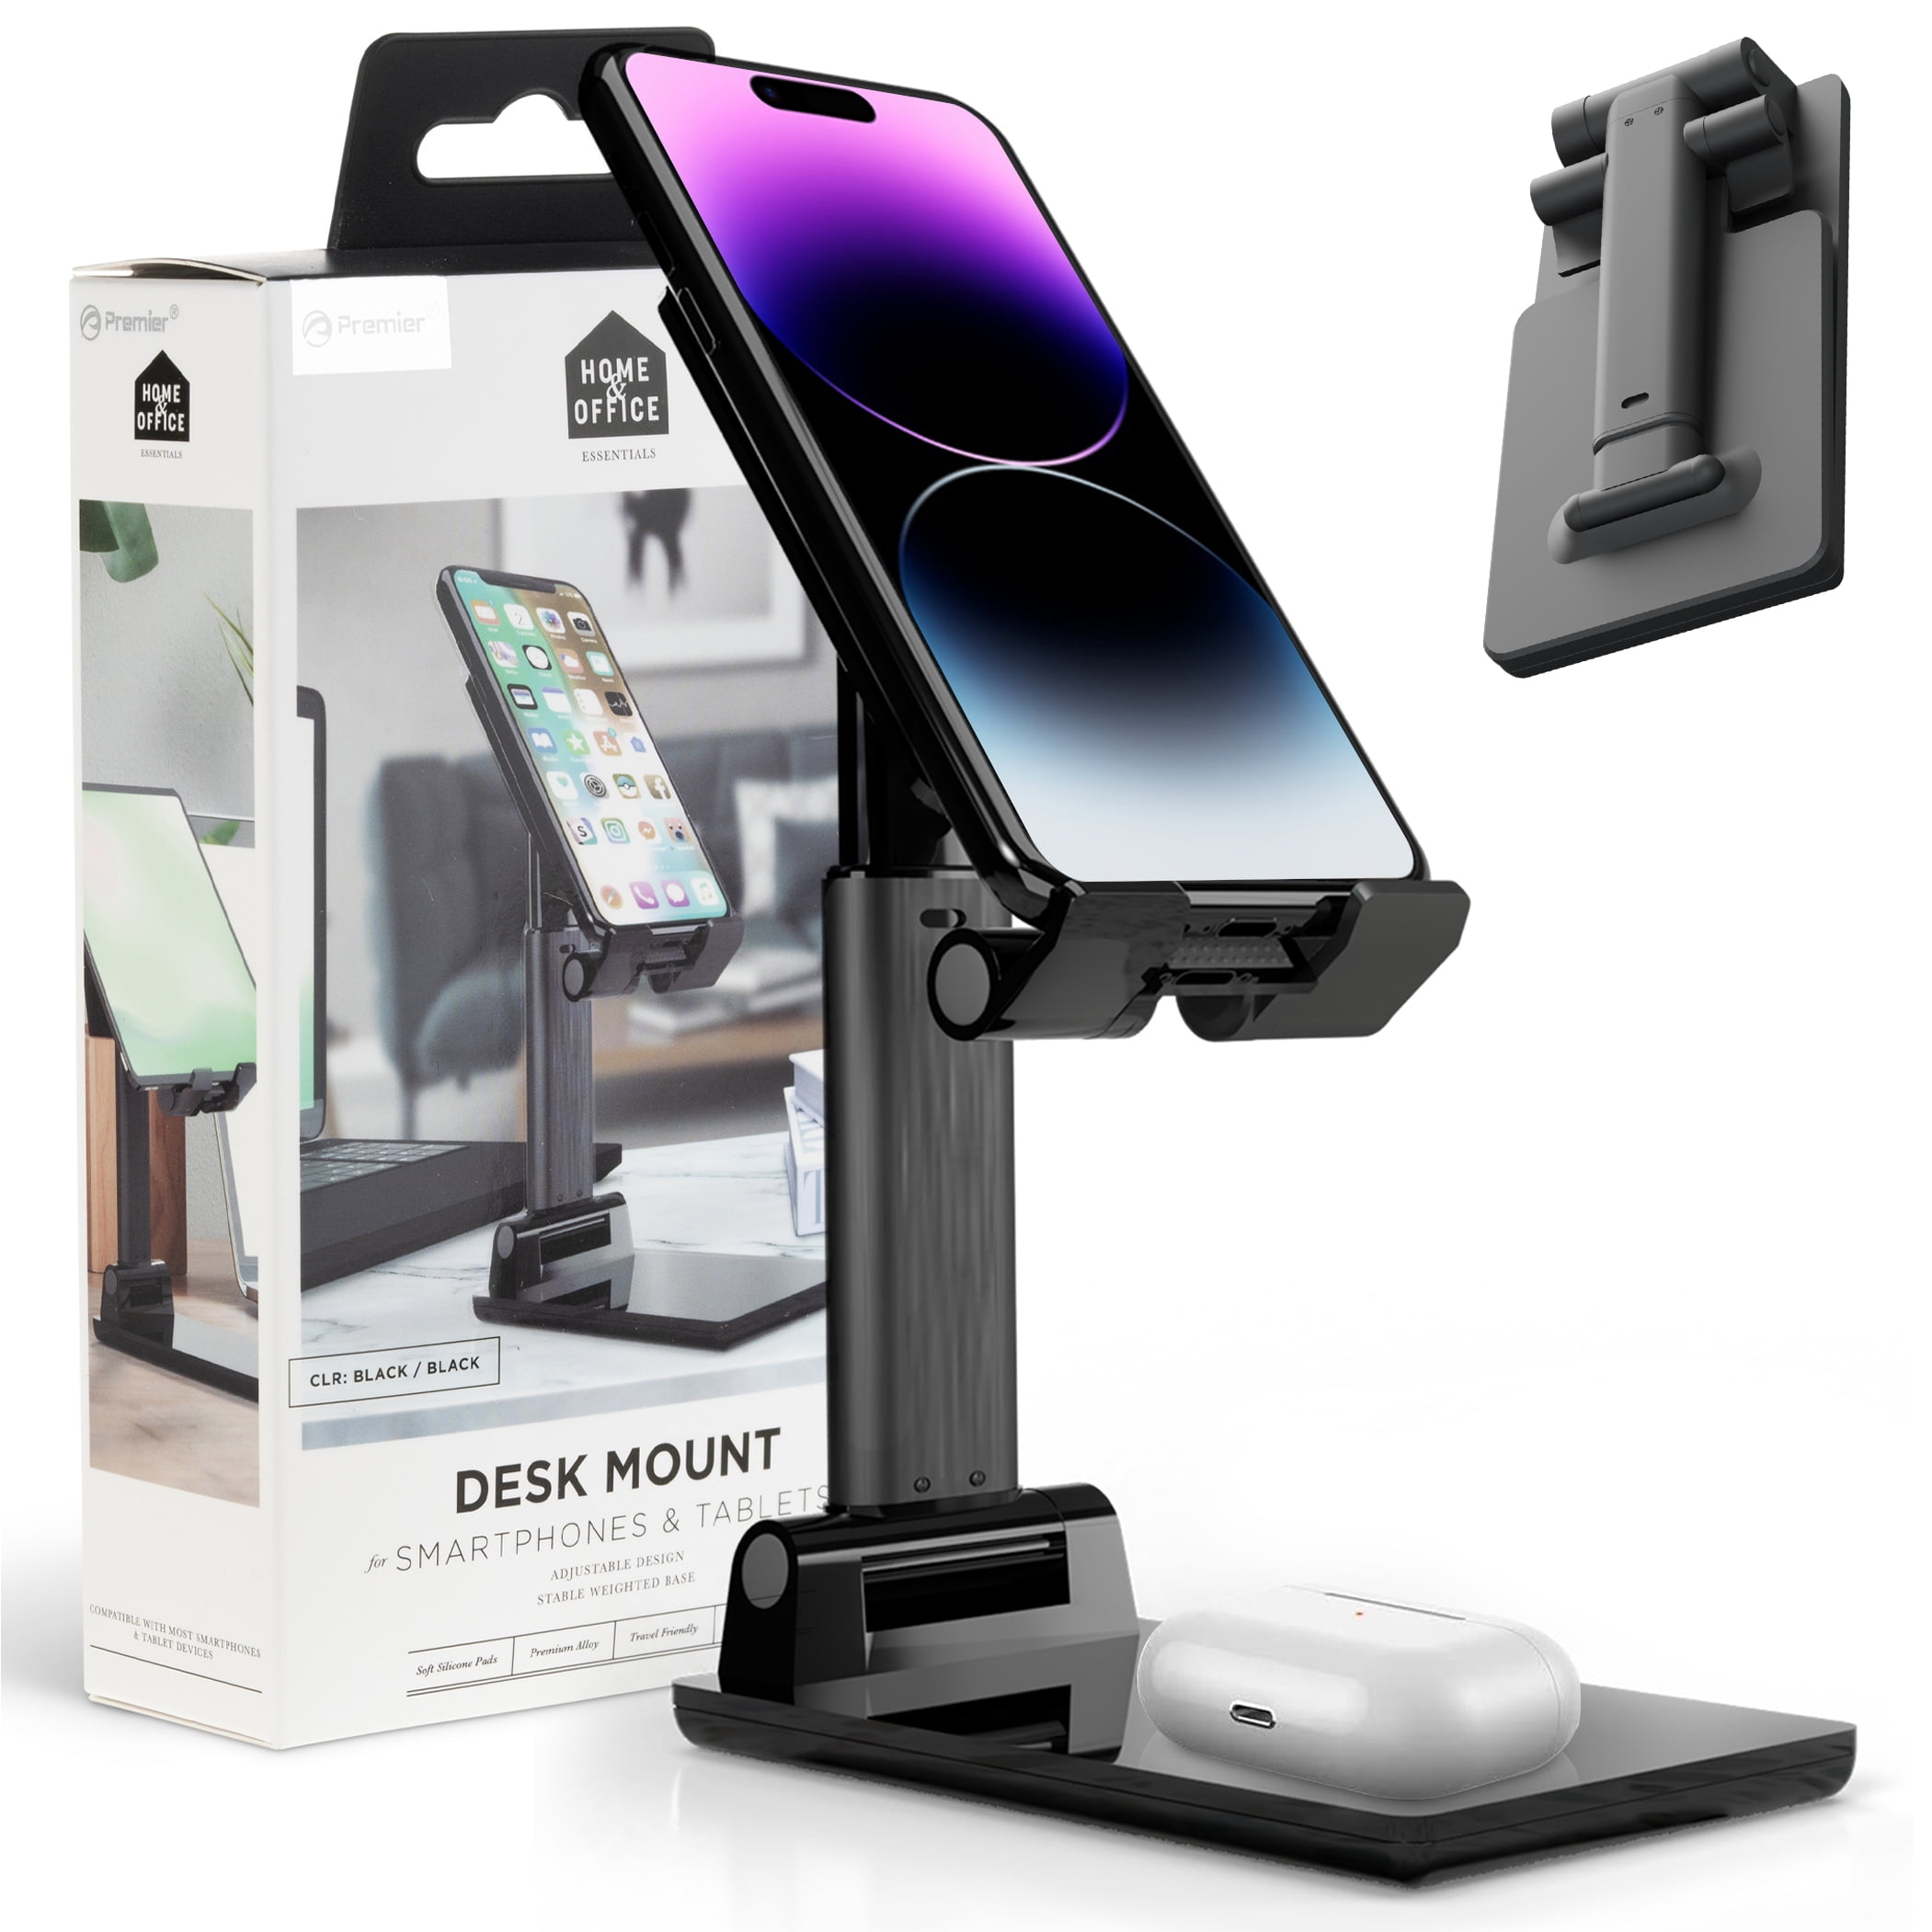 Premier Desktop Tablet and Mobile Phone Stand, Portable, Easy to Adjust, Foldable, Black, Size: 6.7 inch x 5 inch x 1.25 inch